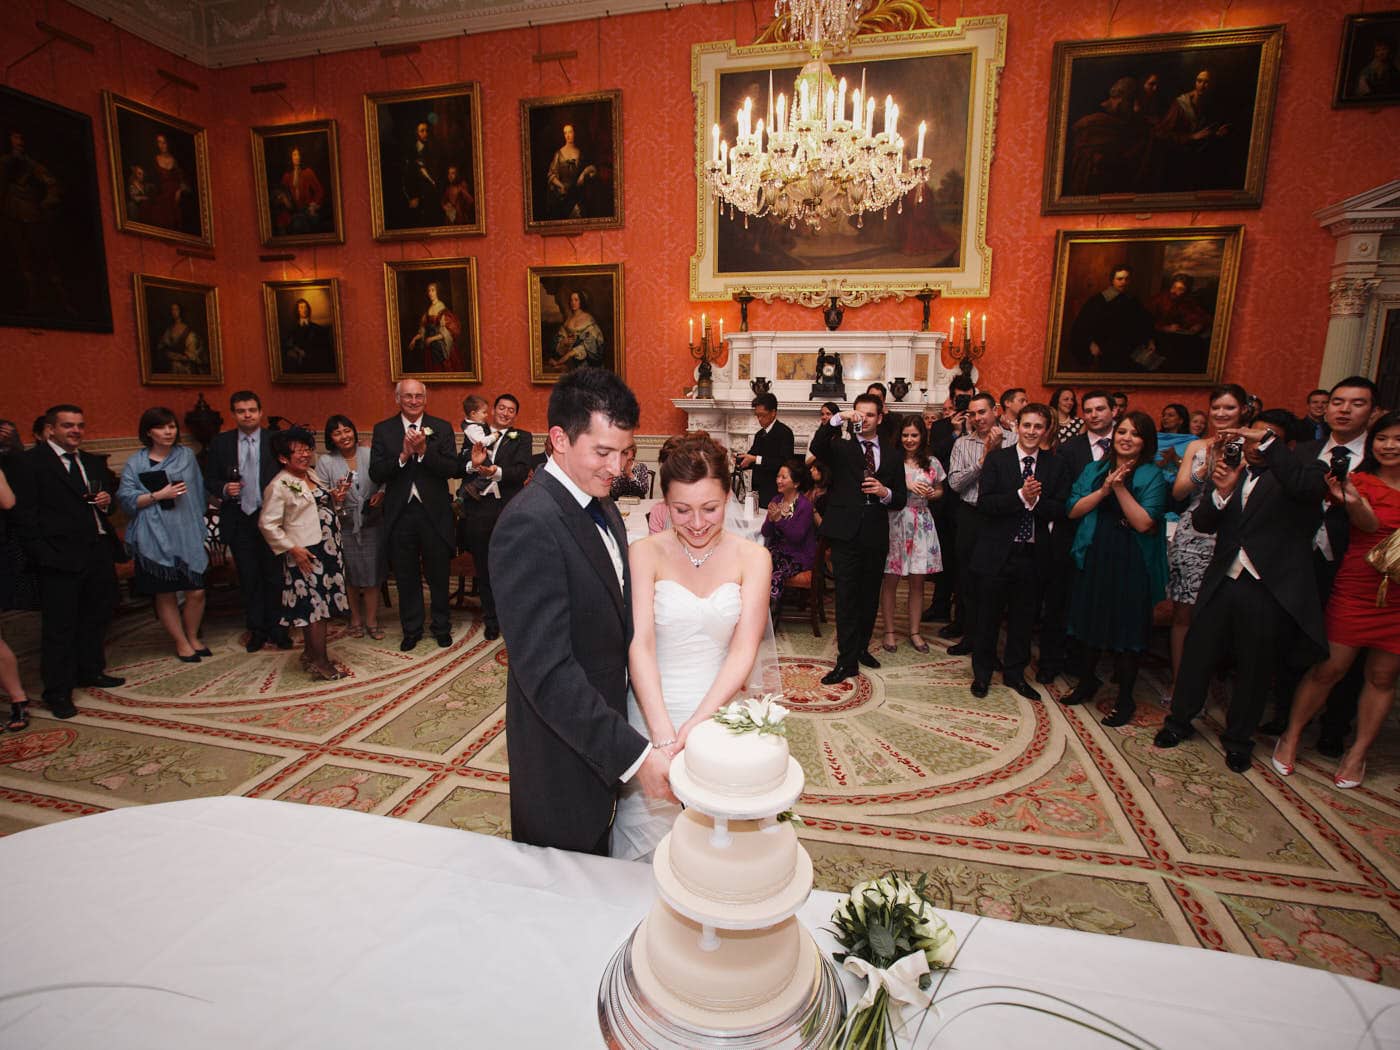 Bride and groom cutting the cake at Weston Park